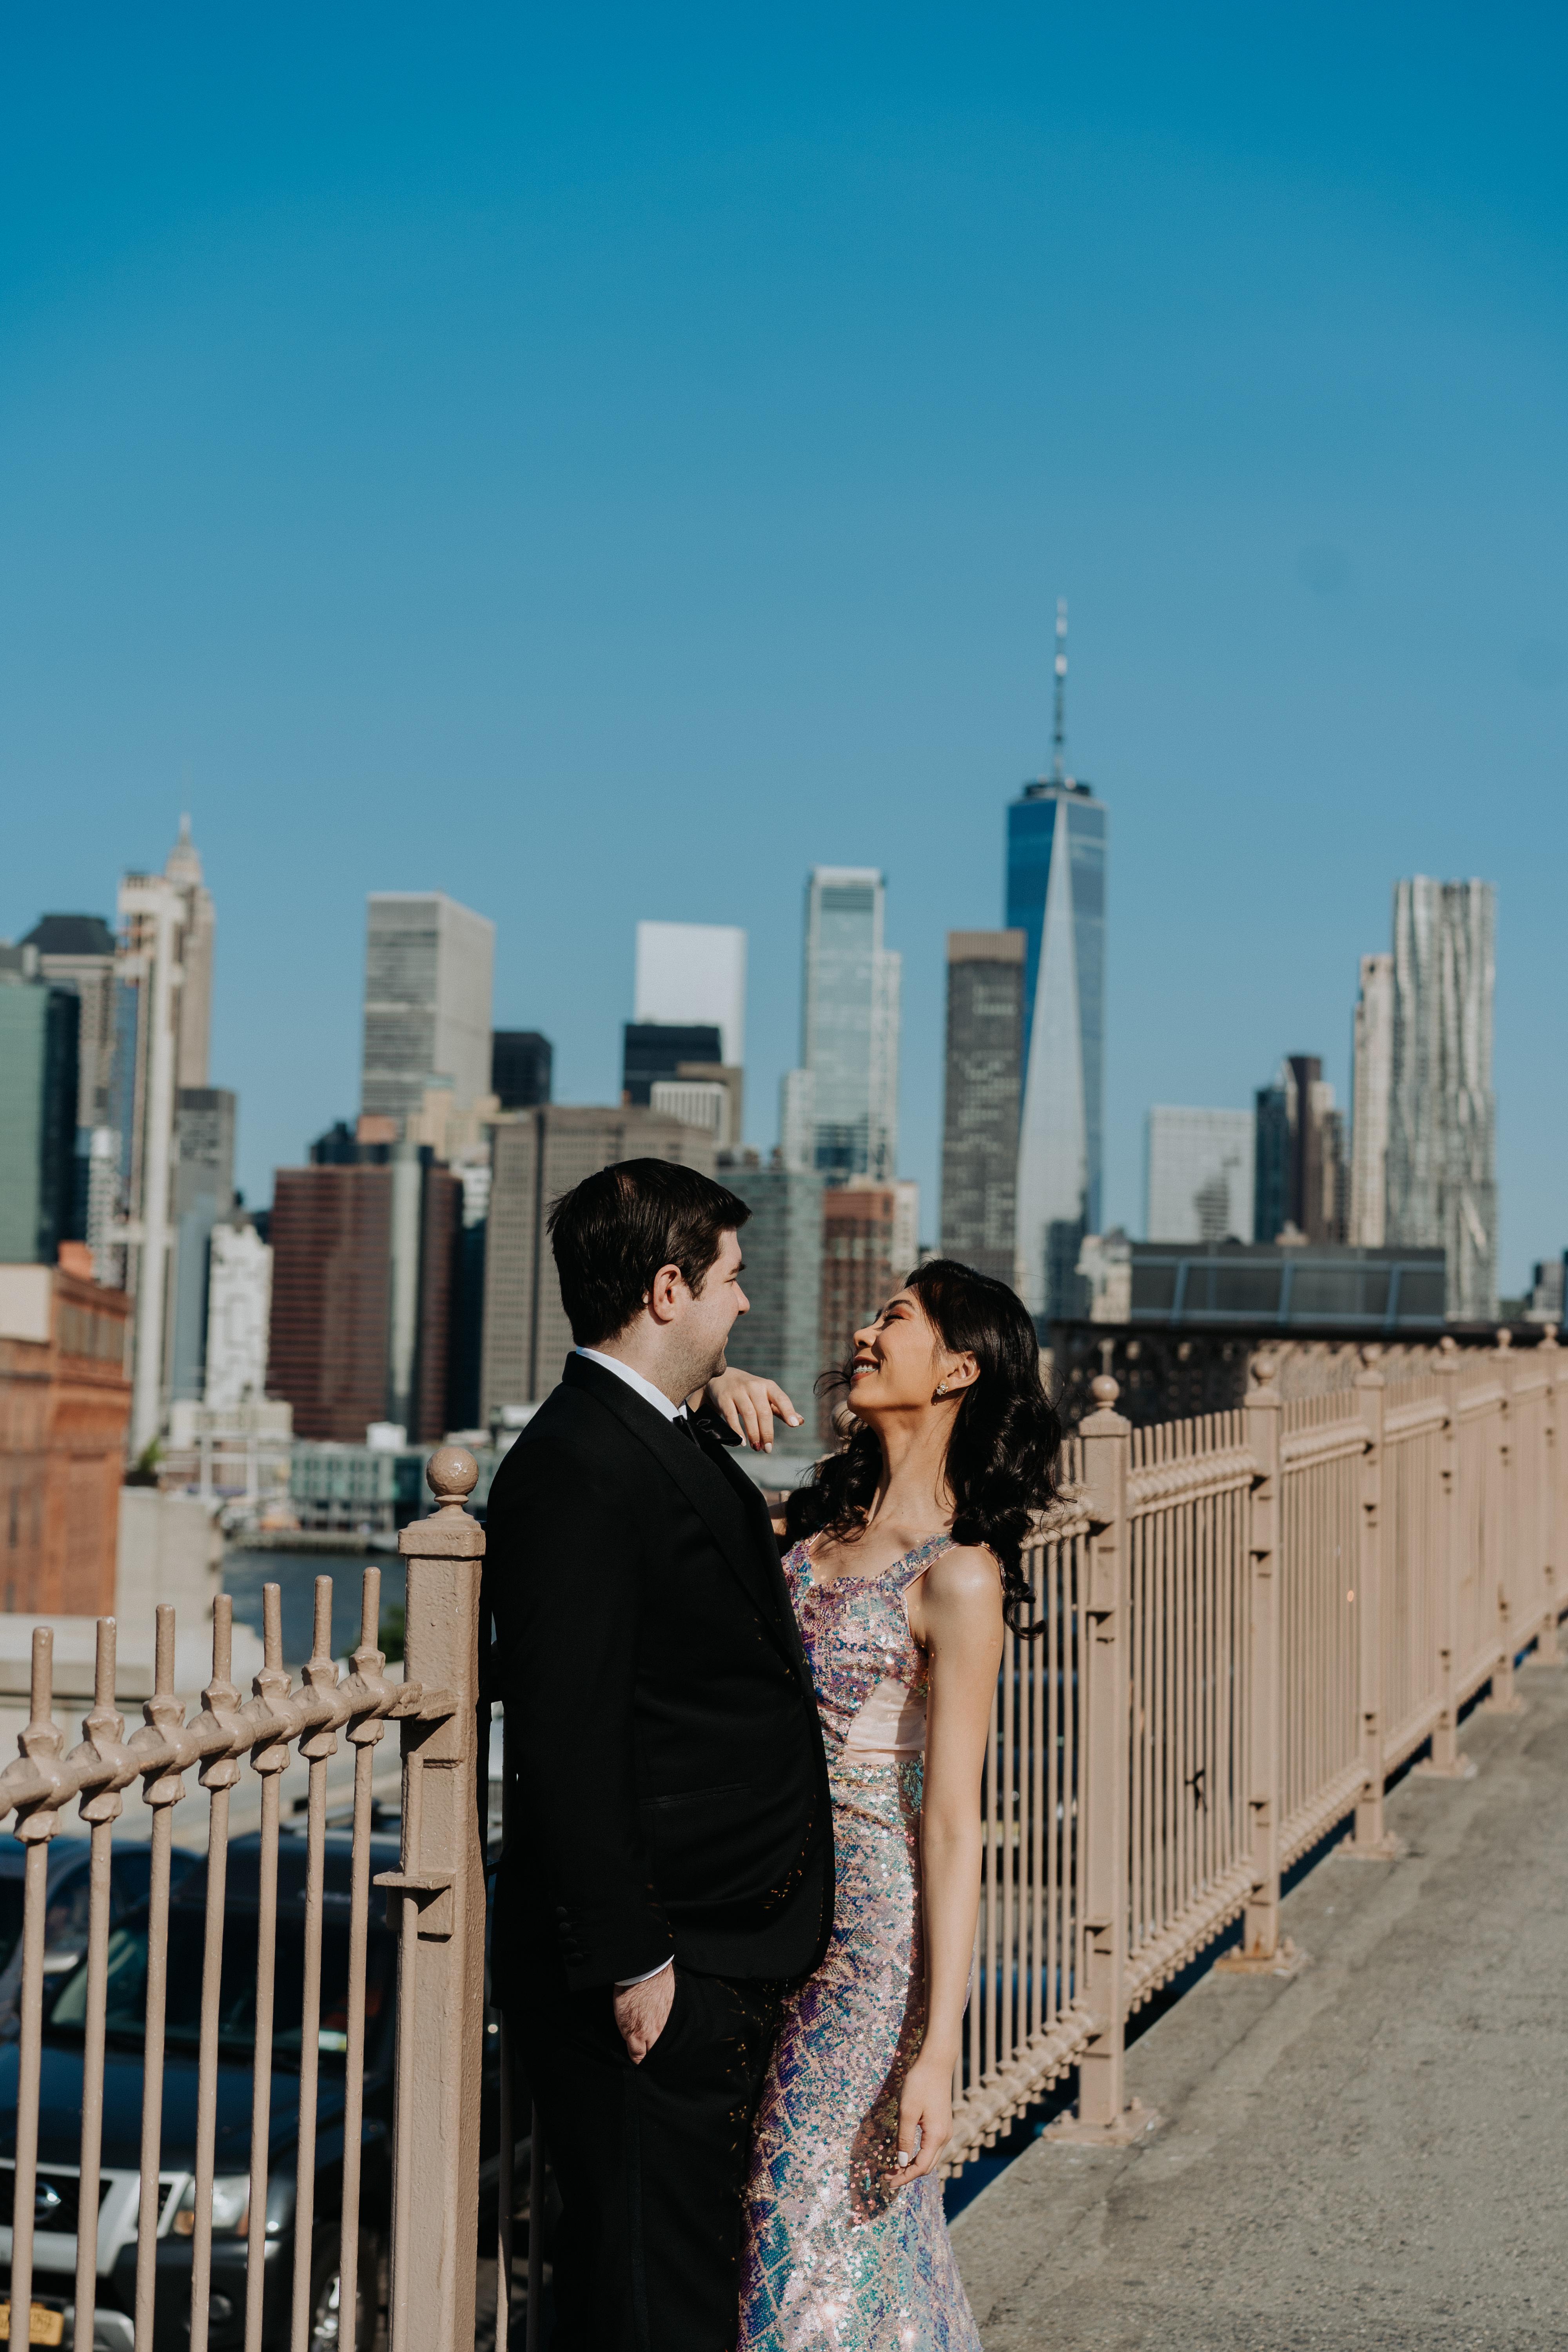 The Wedding Website of Yifan Shi and Sean Burke